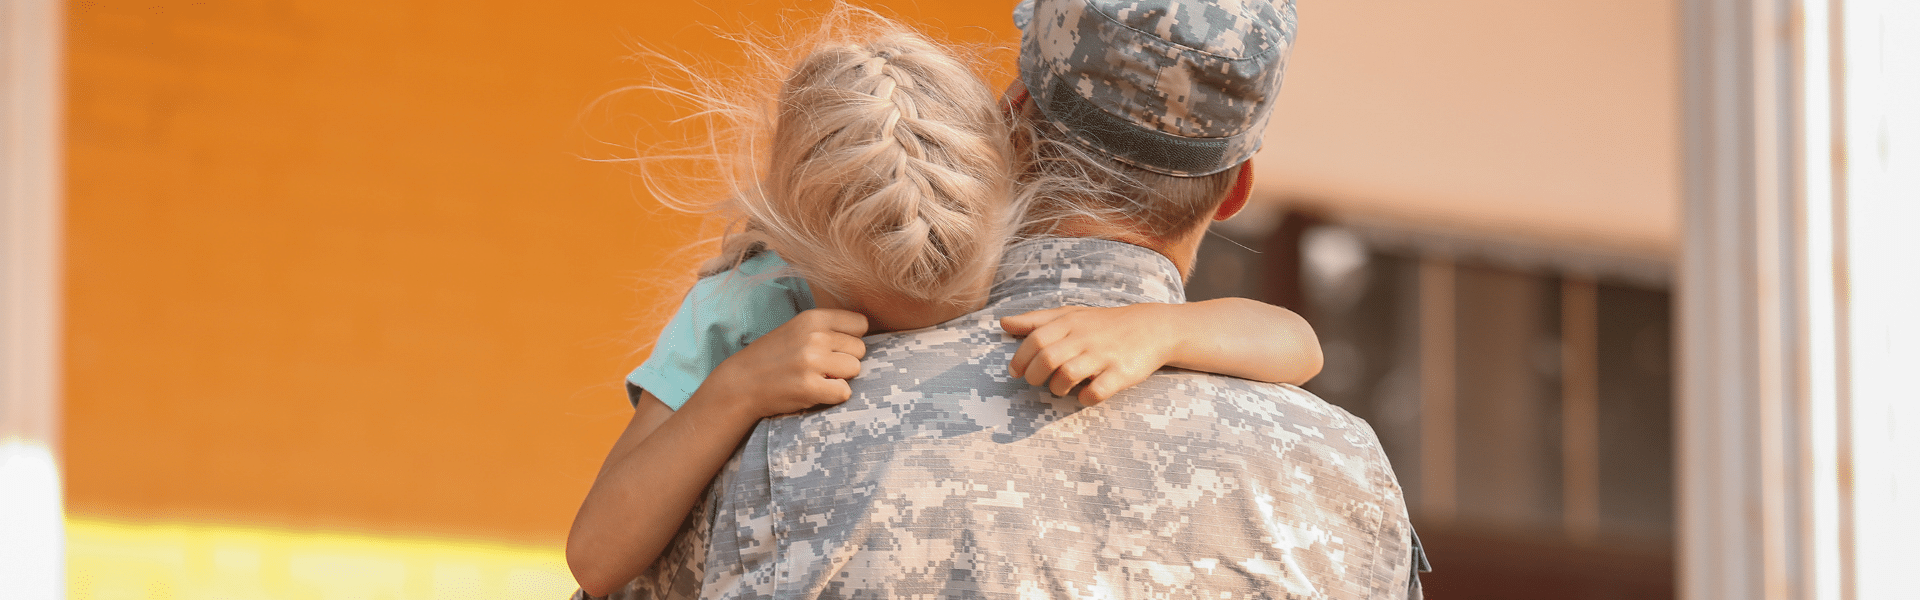 daughter embracing father in military uniform